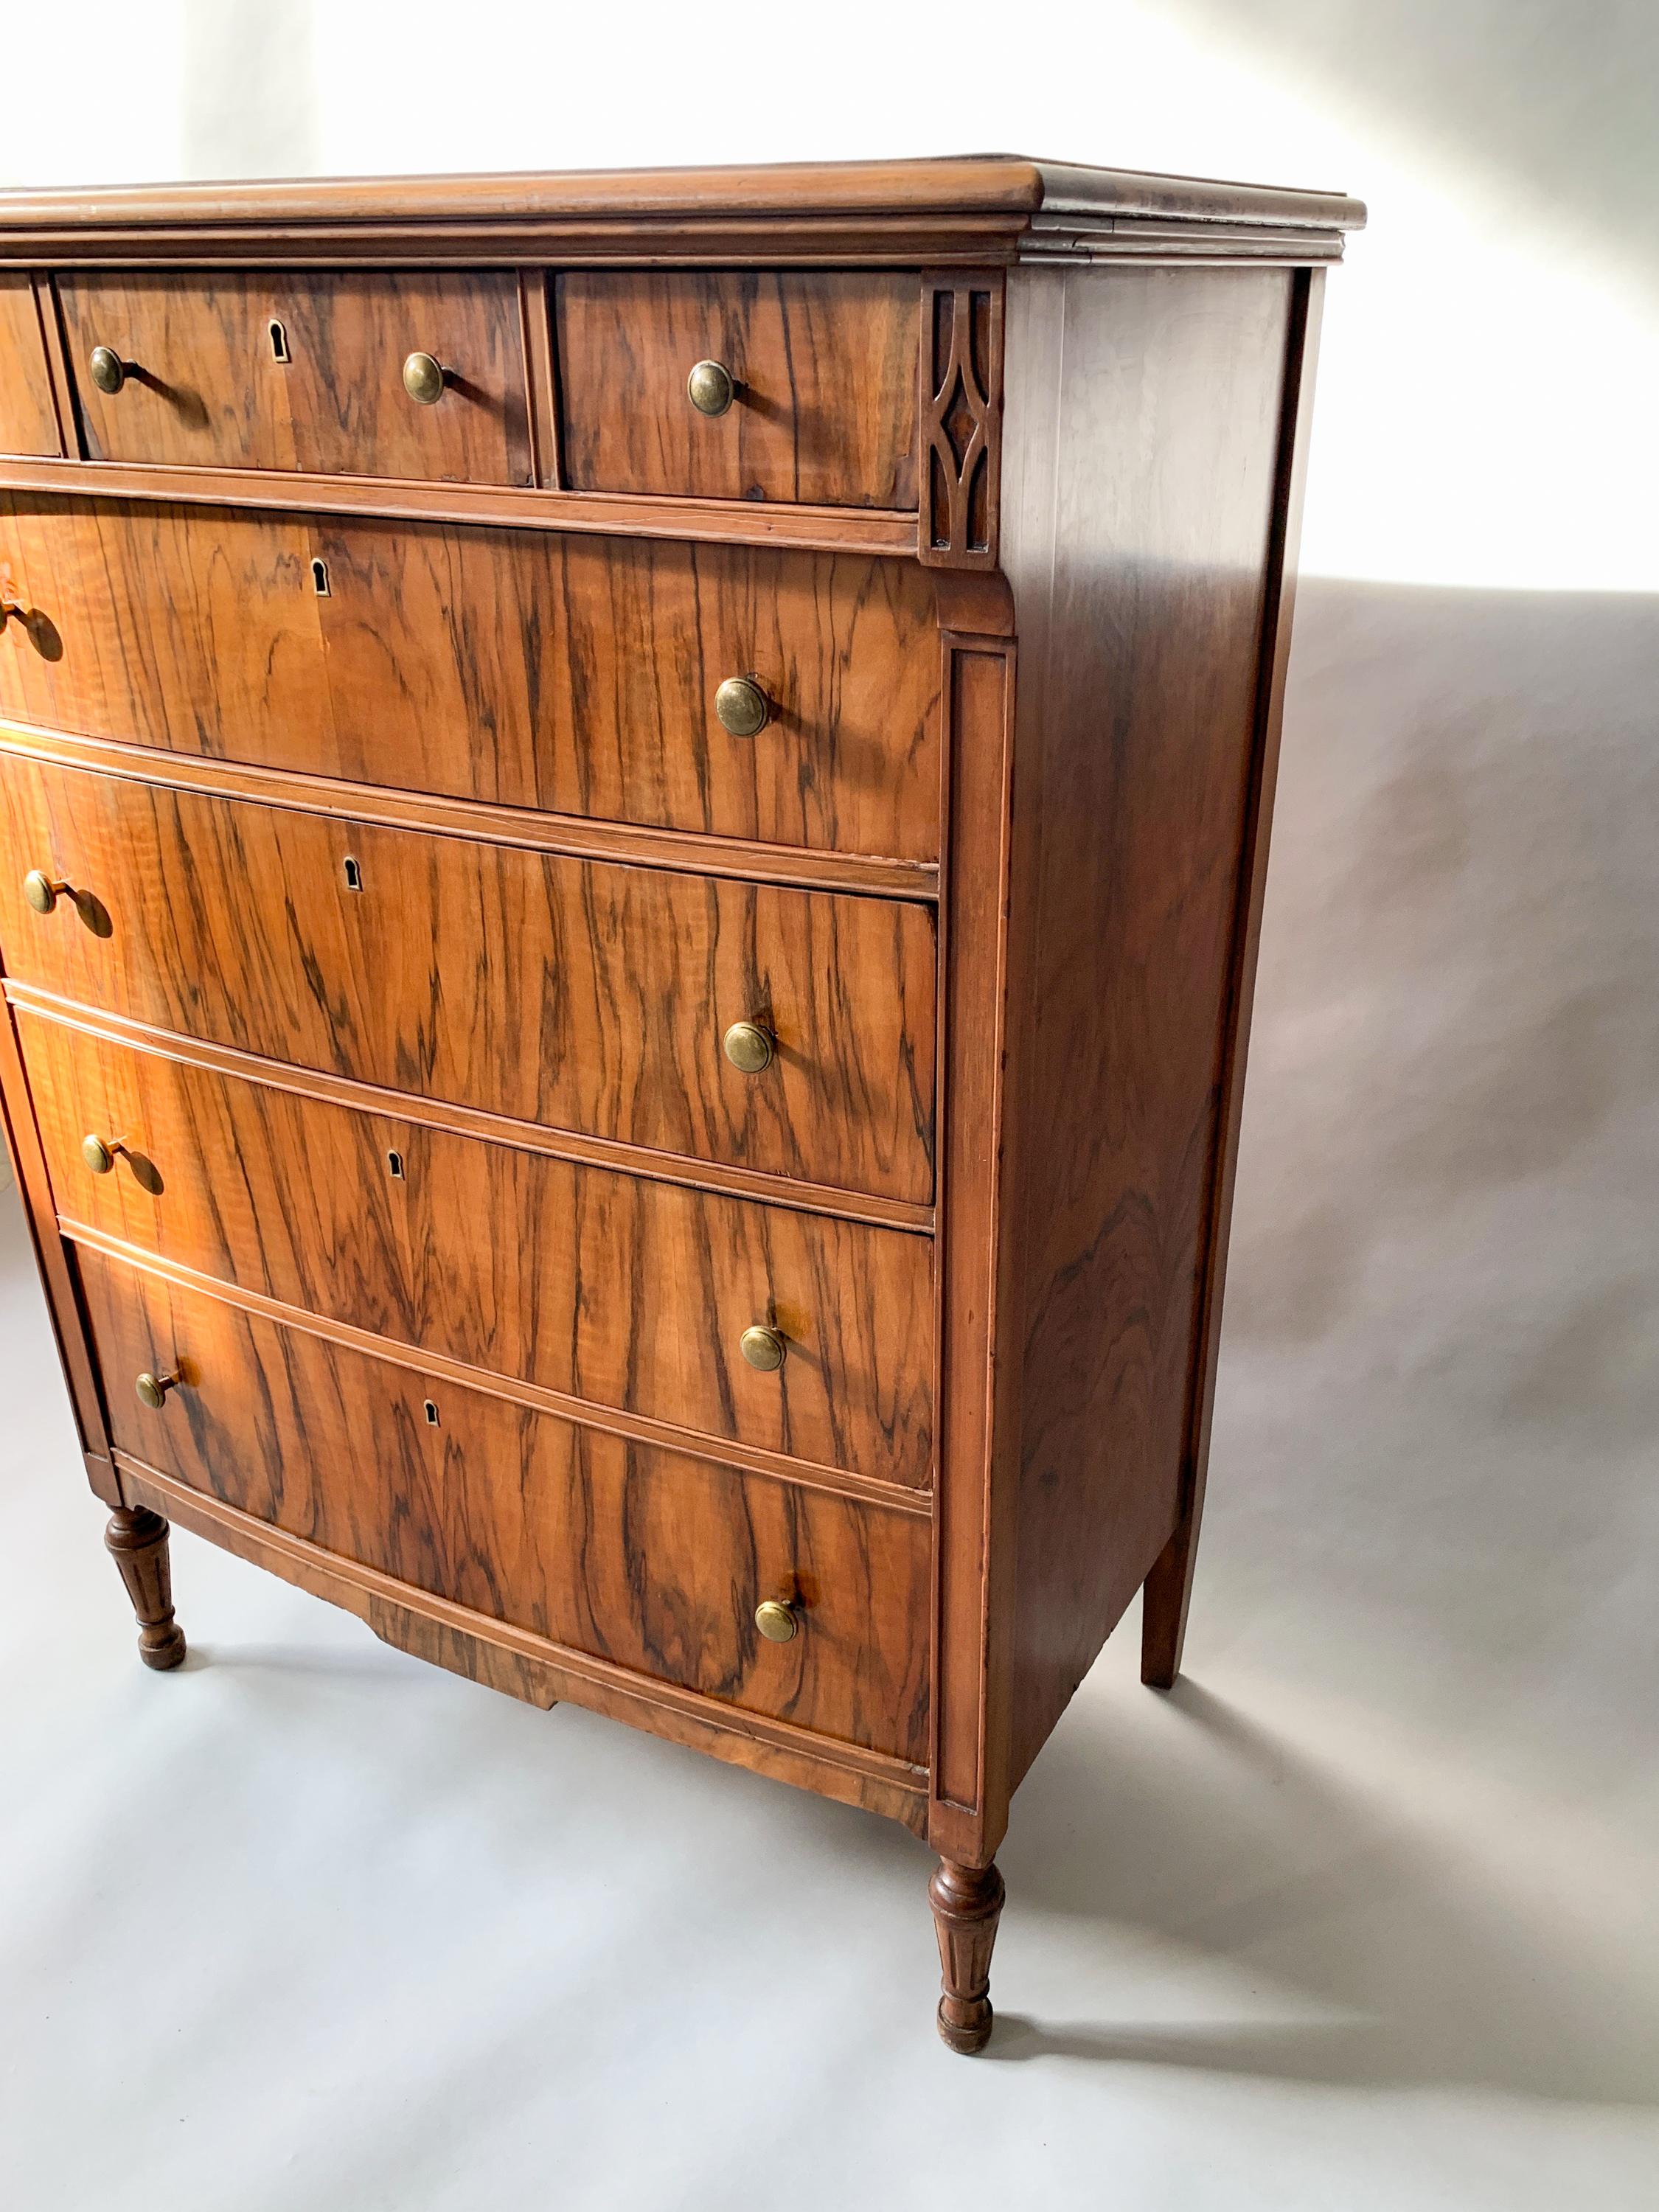 Art Deco 1930s Rosewood English Dresser with Brass Knobs